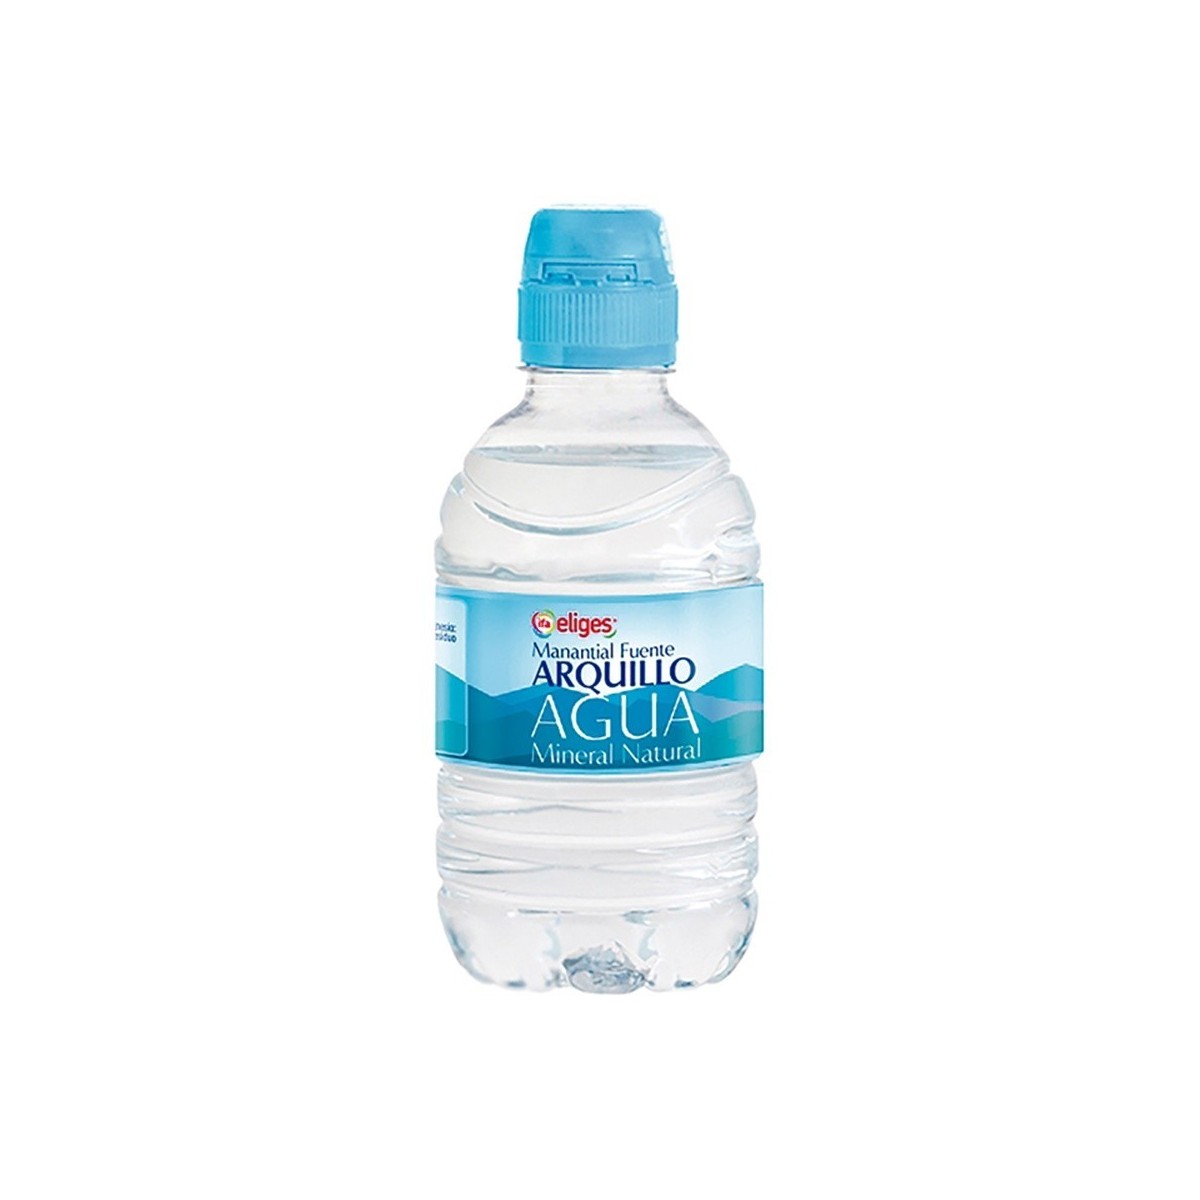 AGUA MINERAL SPORT IFA ELIGES 330 ml.